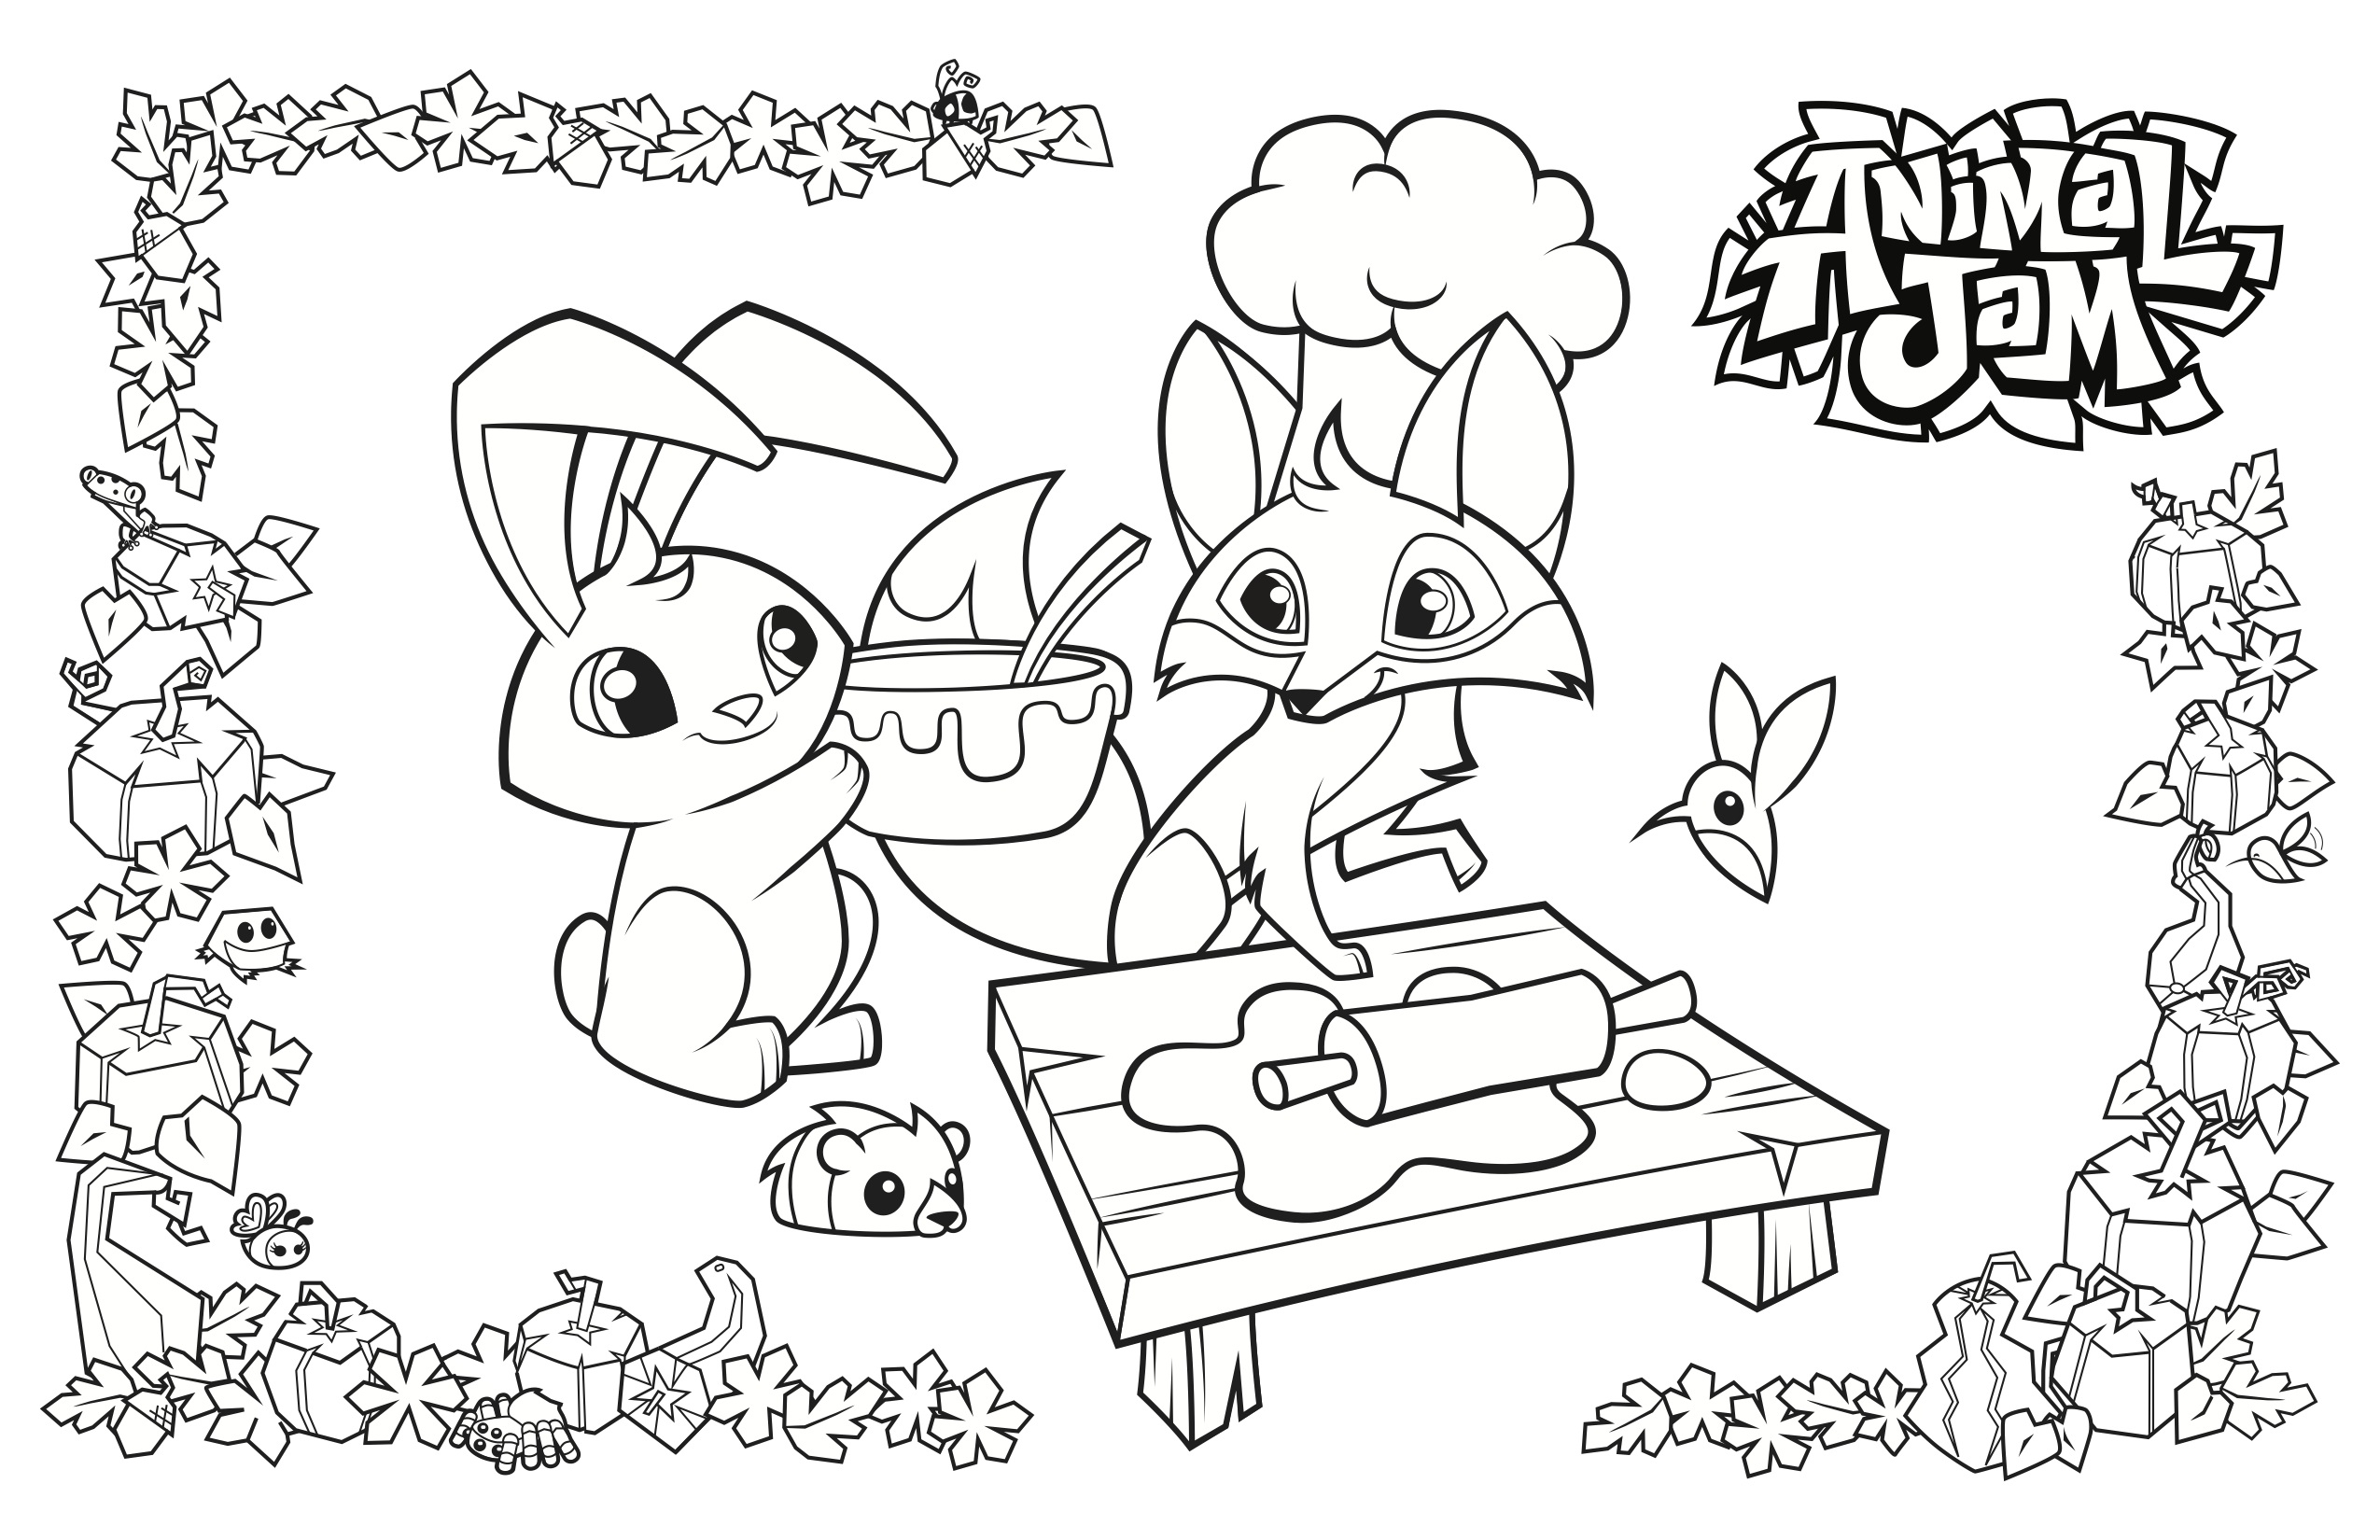 Animal Jam Coloring Pages At GetDrawings.com   Free For ...